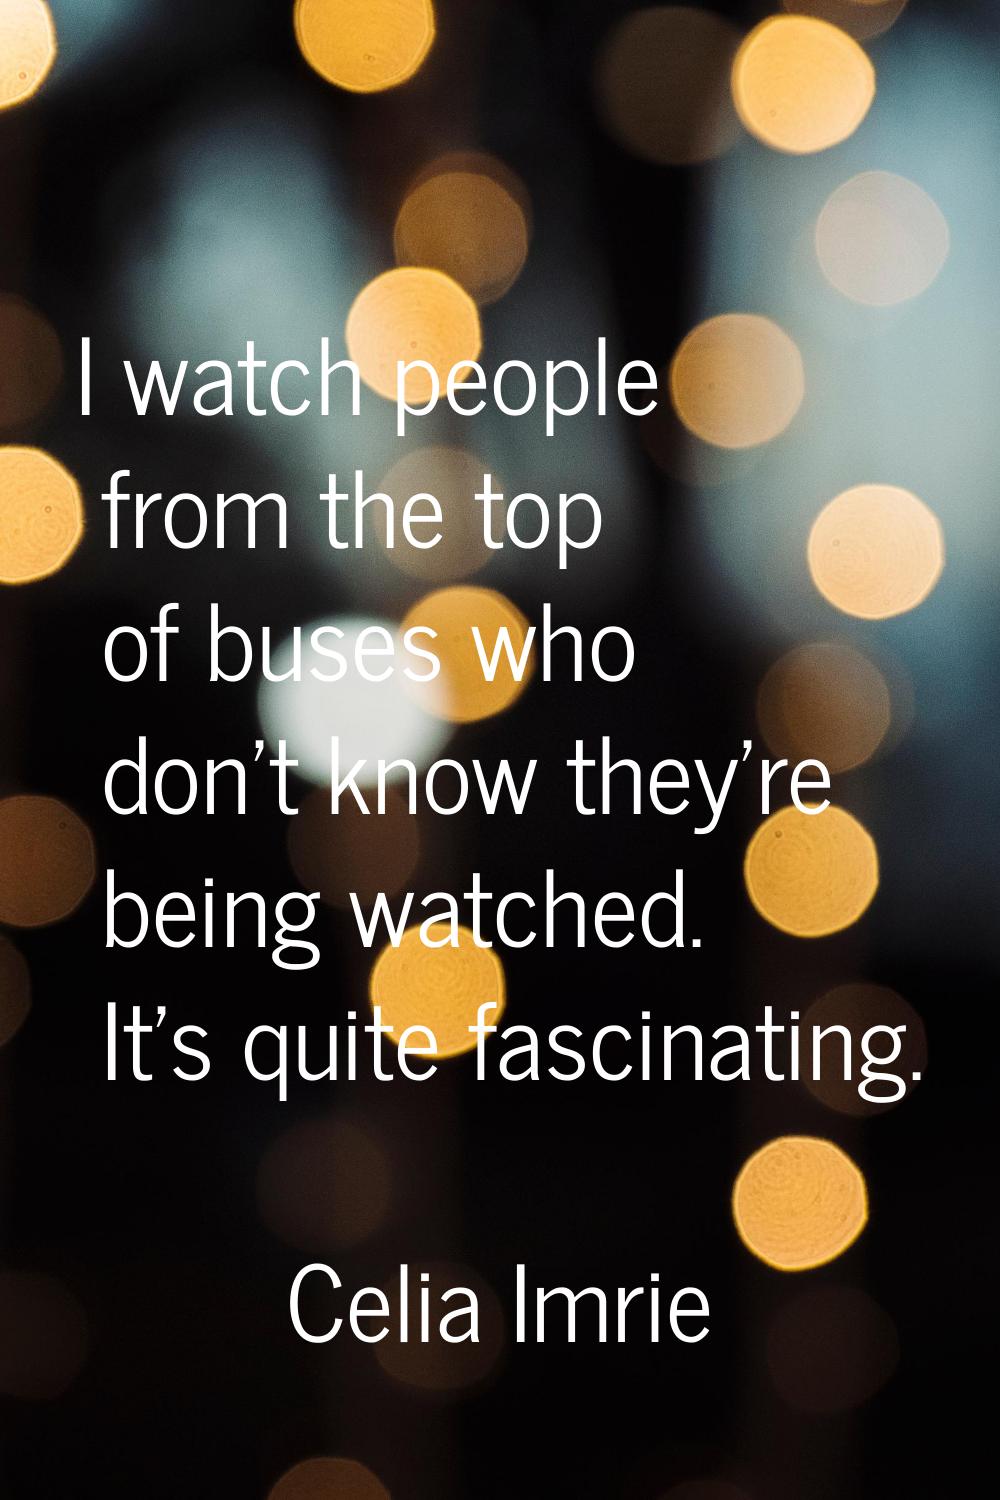 I watch people from the top of buses who don't know they're being watched. It's quite fascinating.